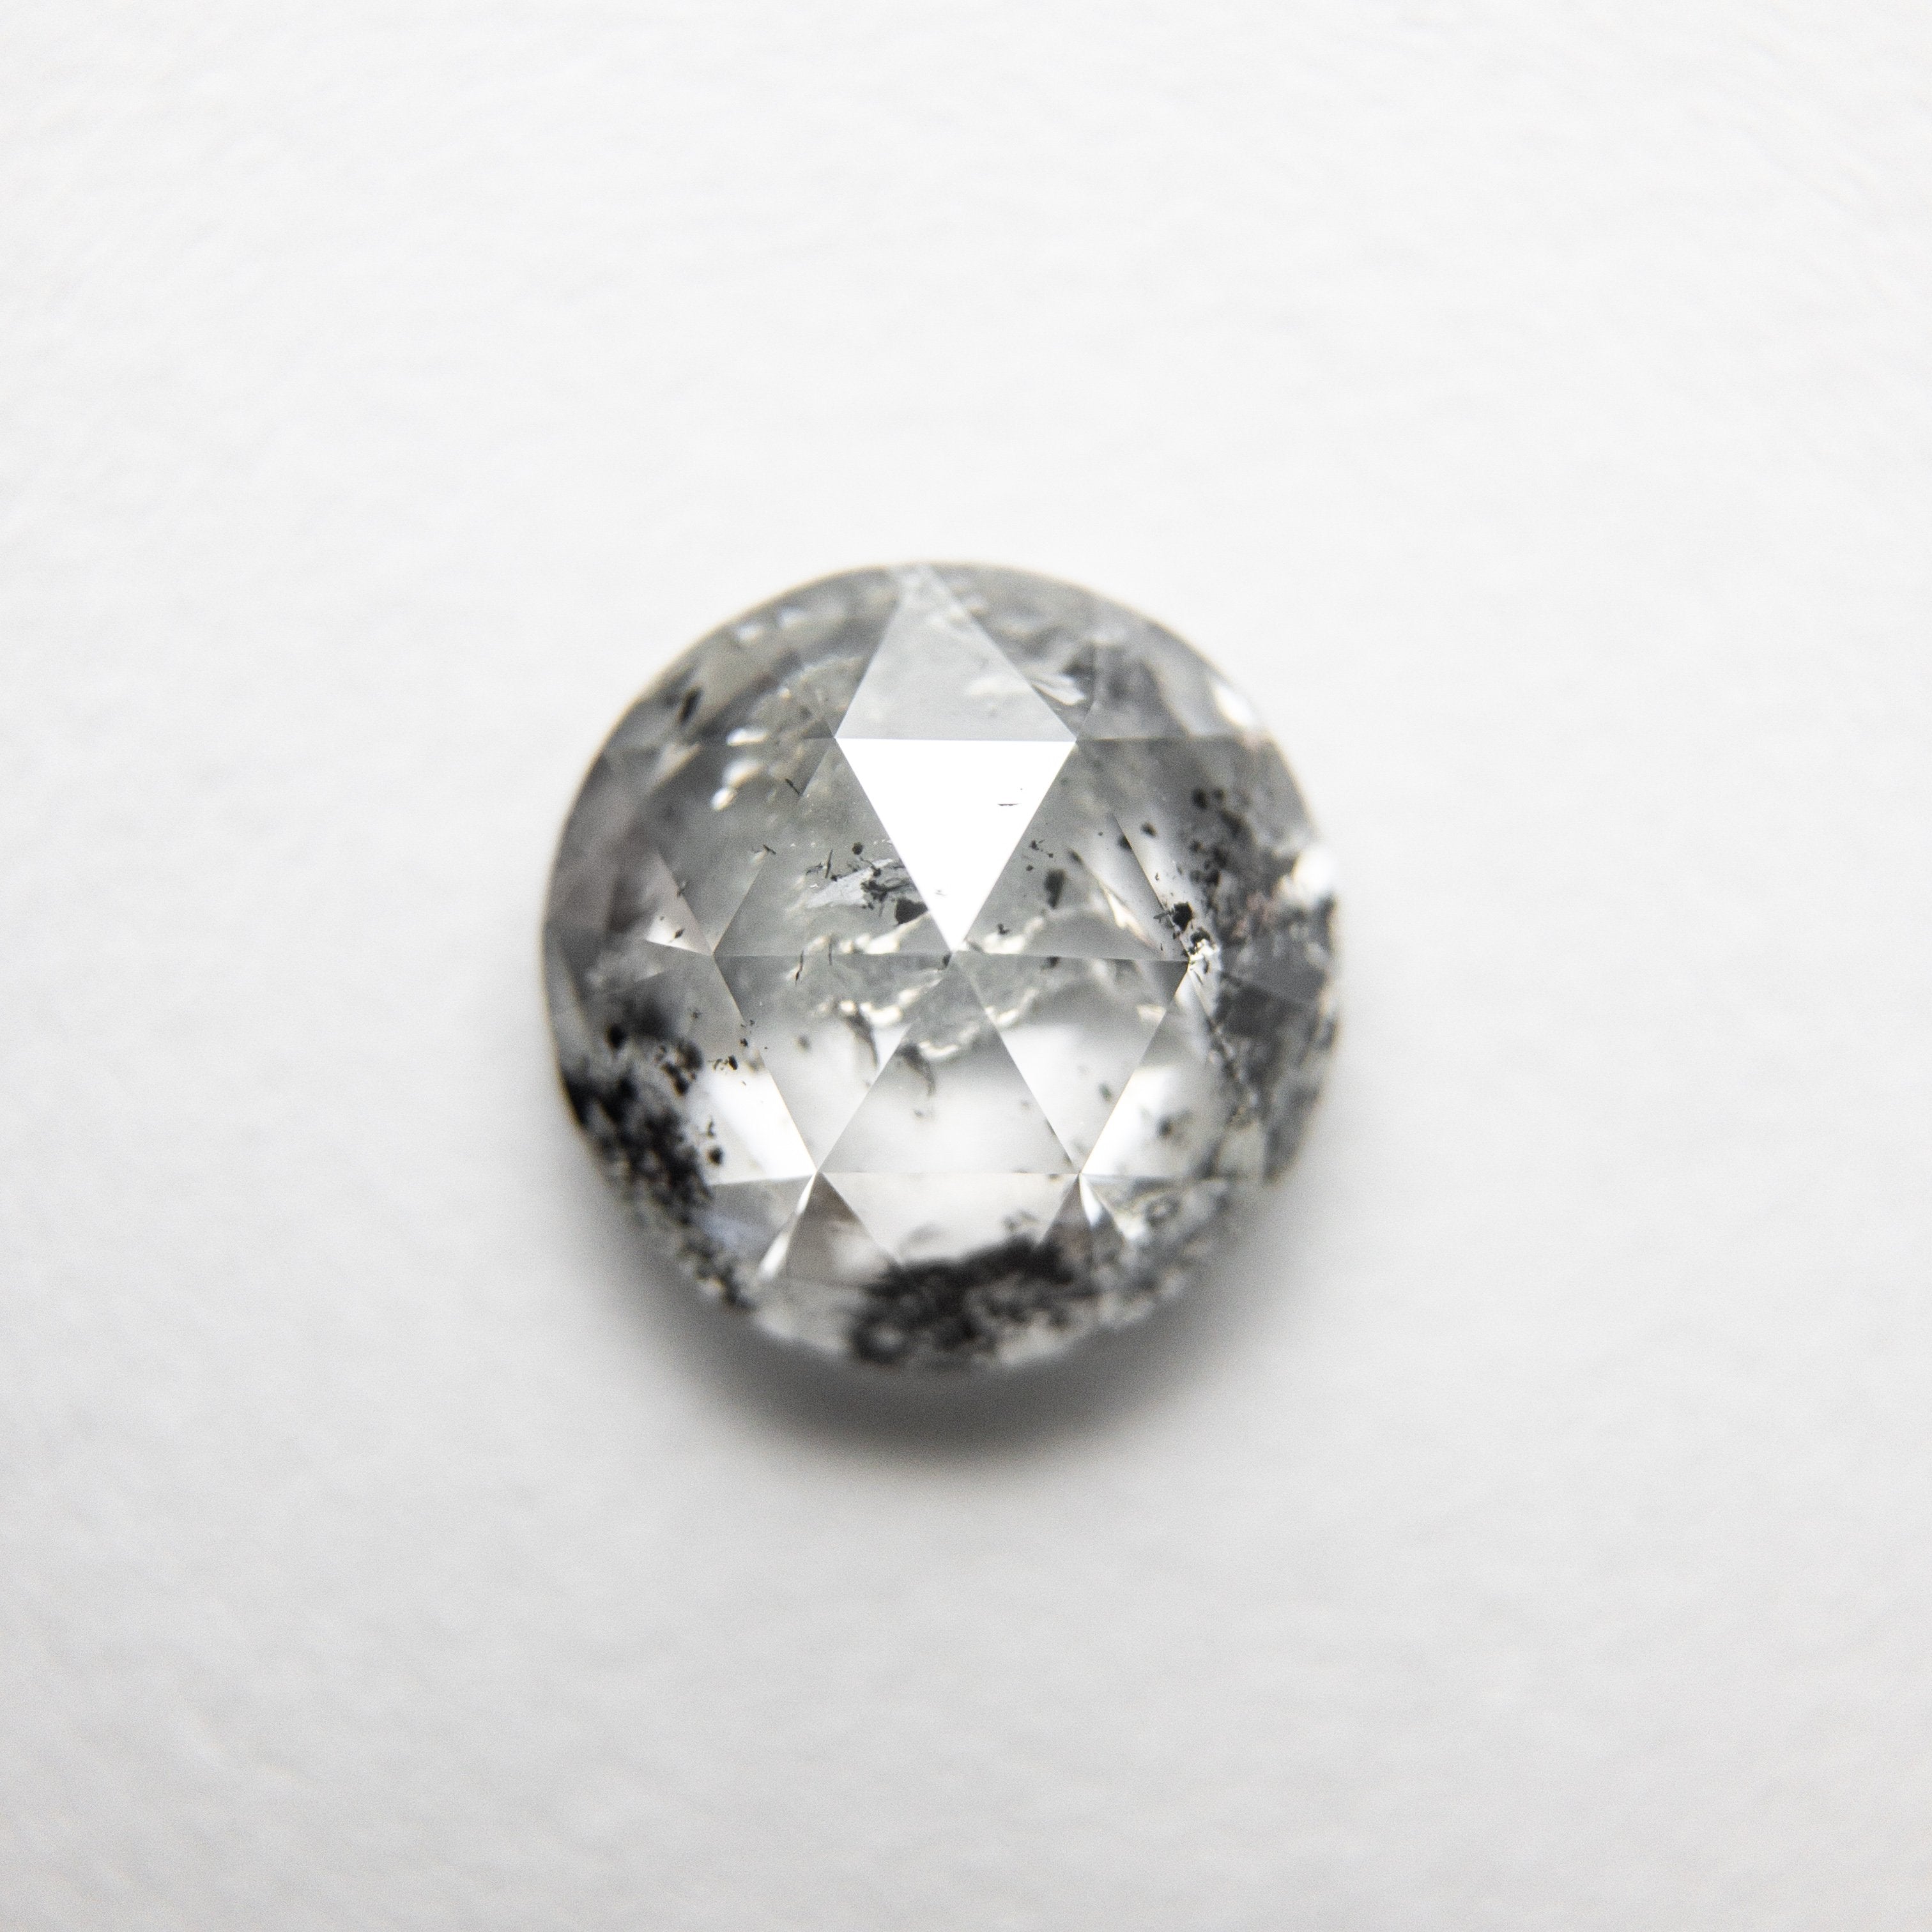 1.14ct 6.91x6.85x3.07mm Round Double Cut 18094-28 HOLD D1137 9/11/20